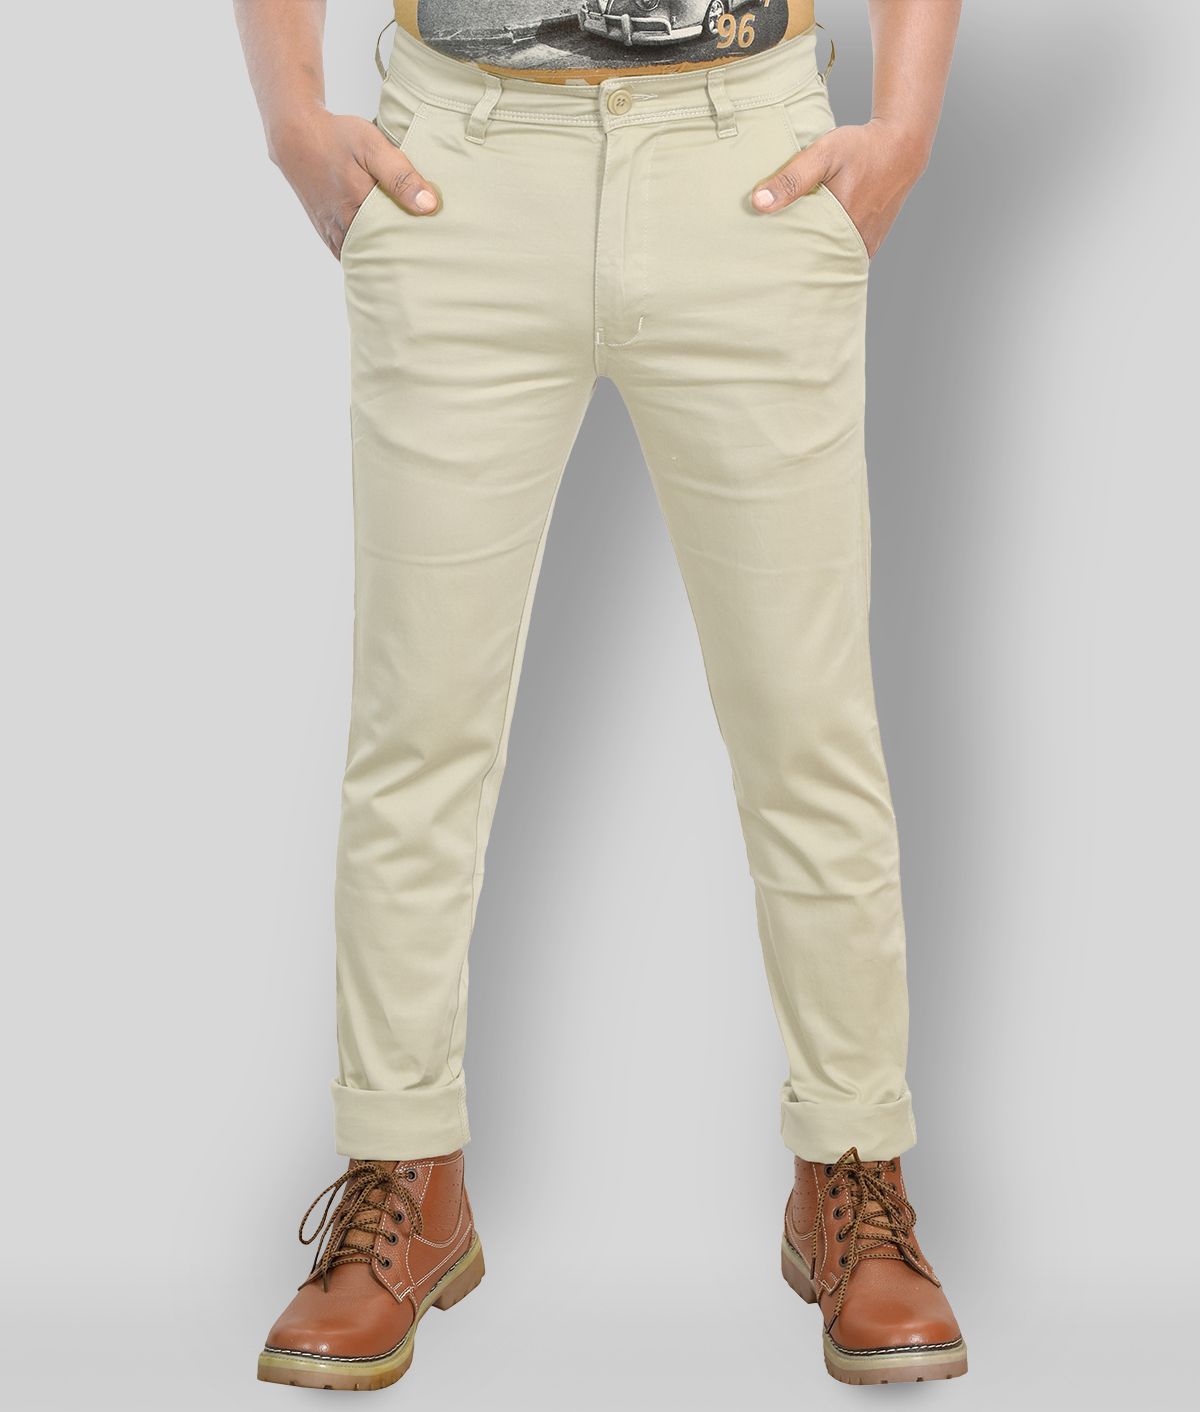     			plounge - Off White Cotton Blend Regular Fit Men's Chinos (Pack of 1)